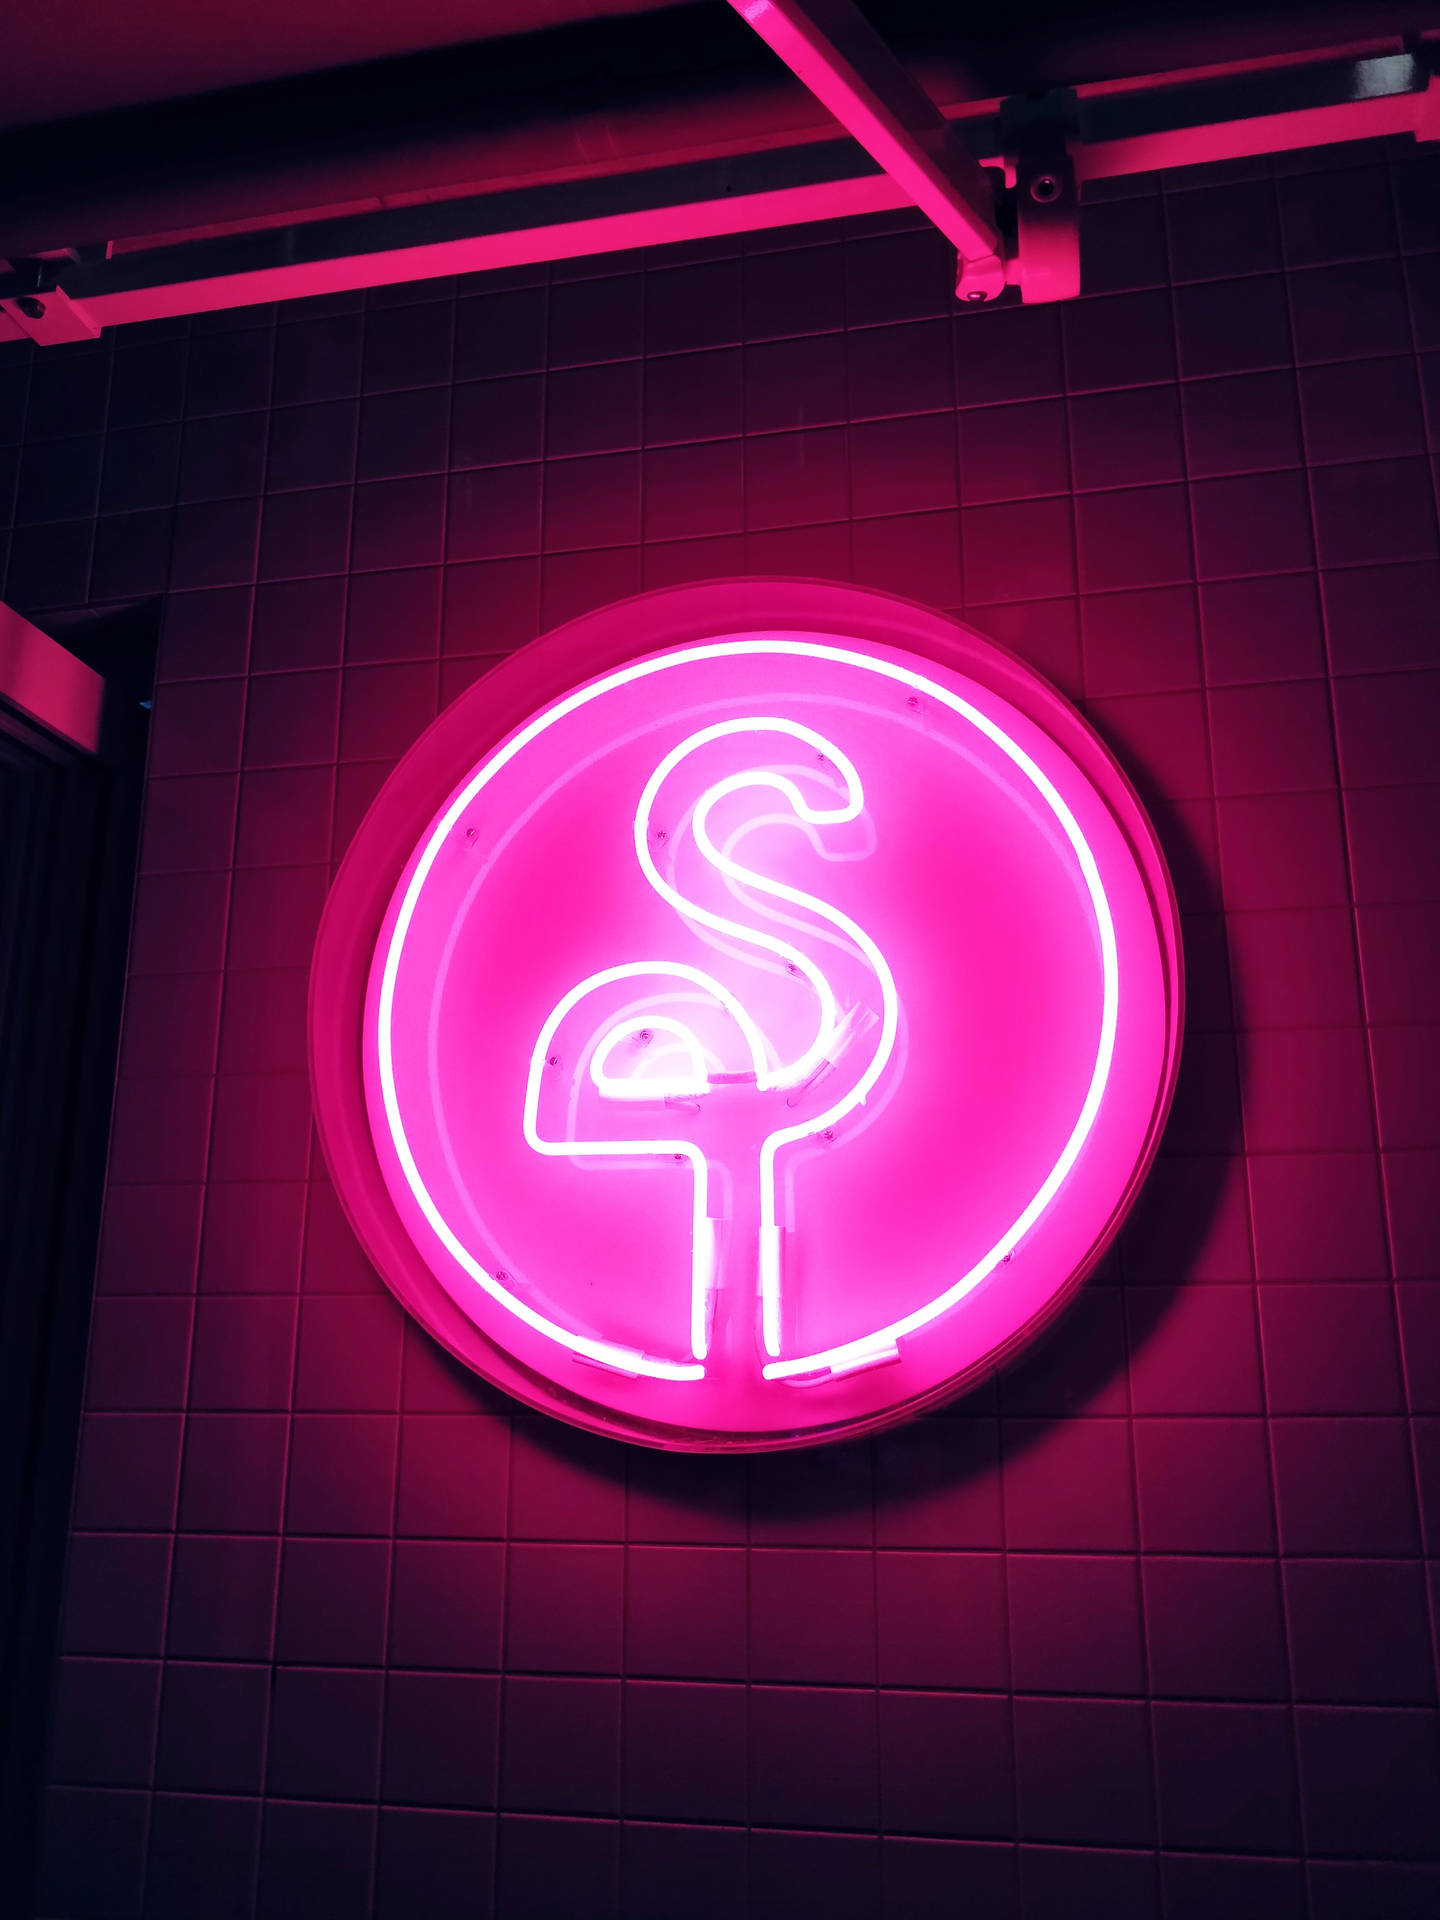 Add some flamingo flair to your decor with this eye-catching neon-lit signboard. Wallpaper